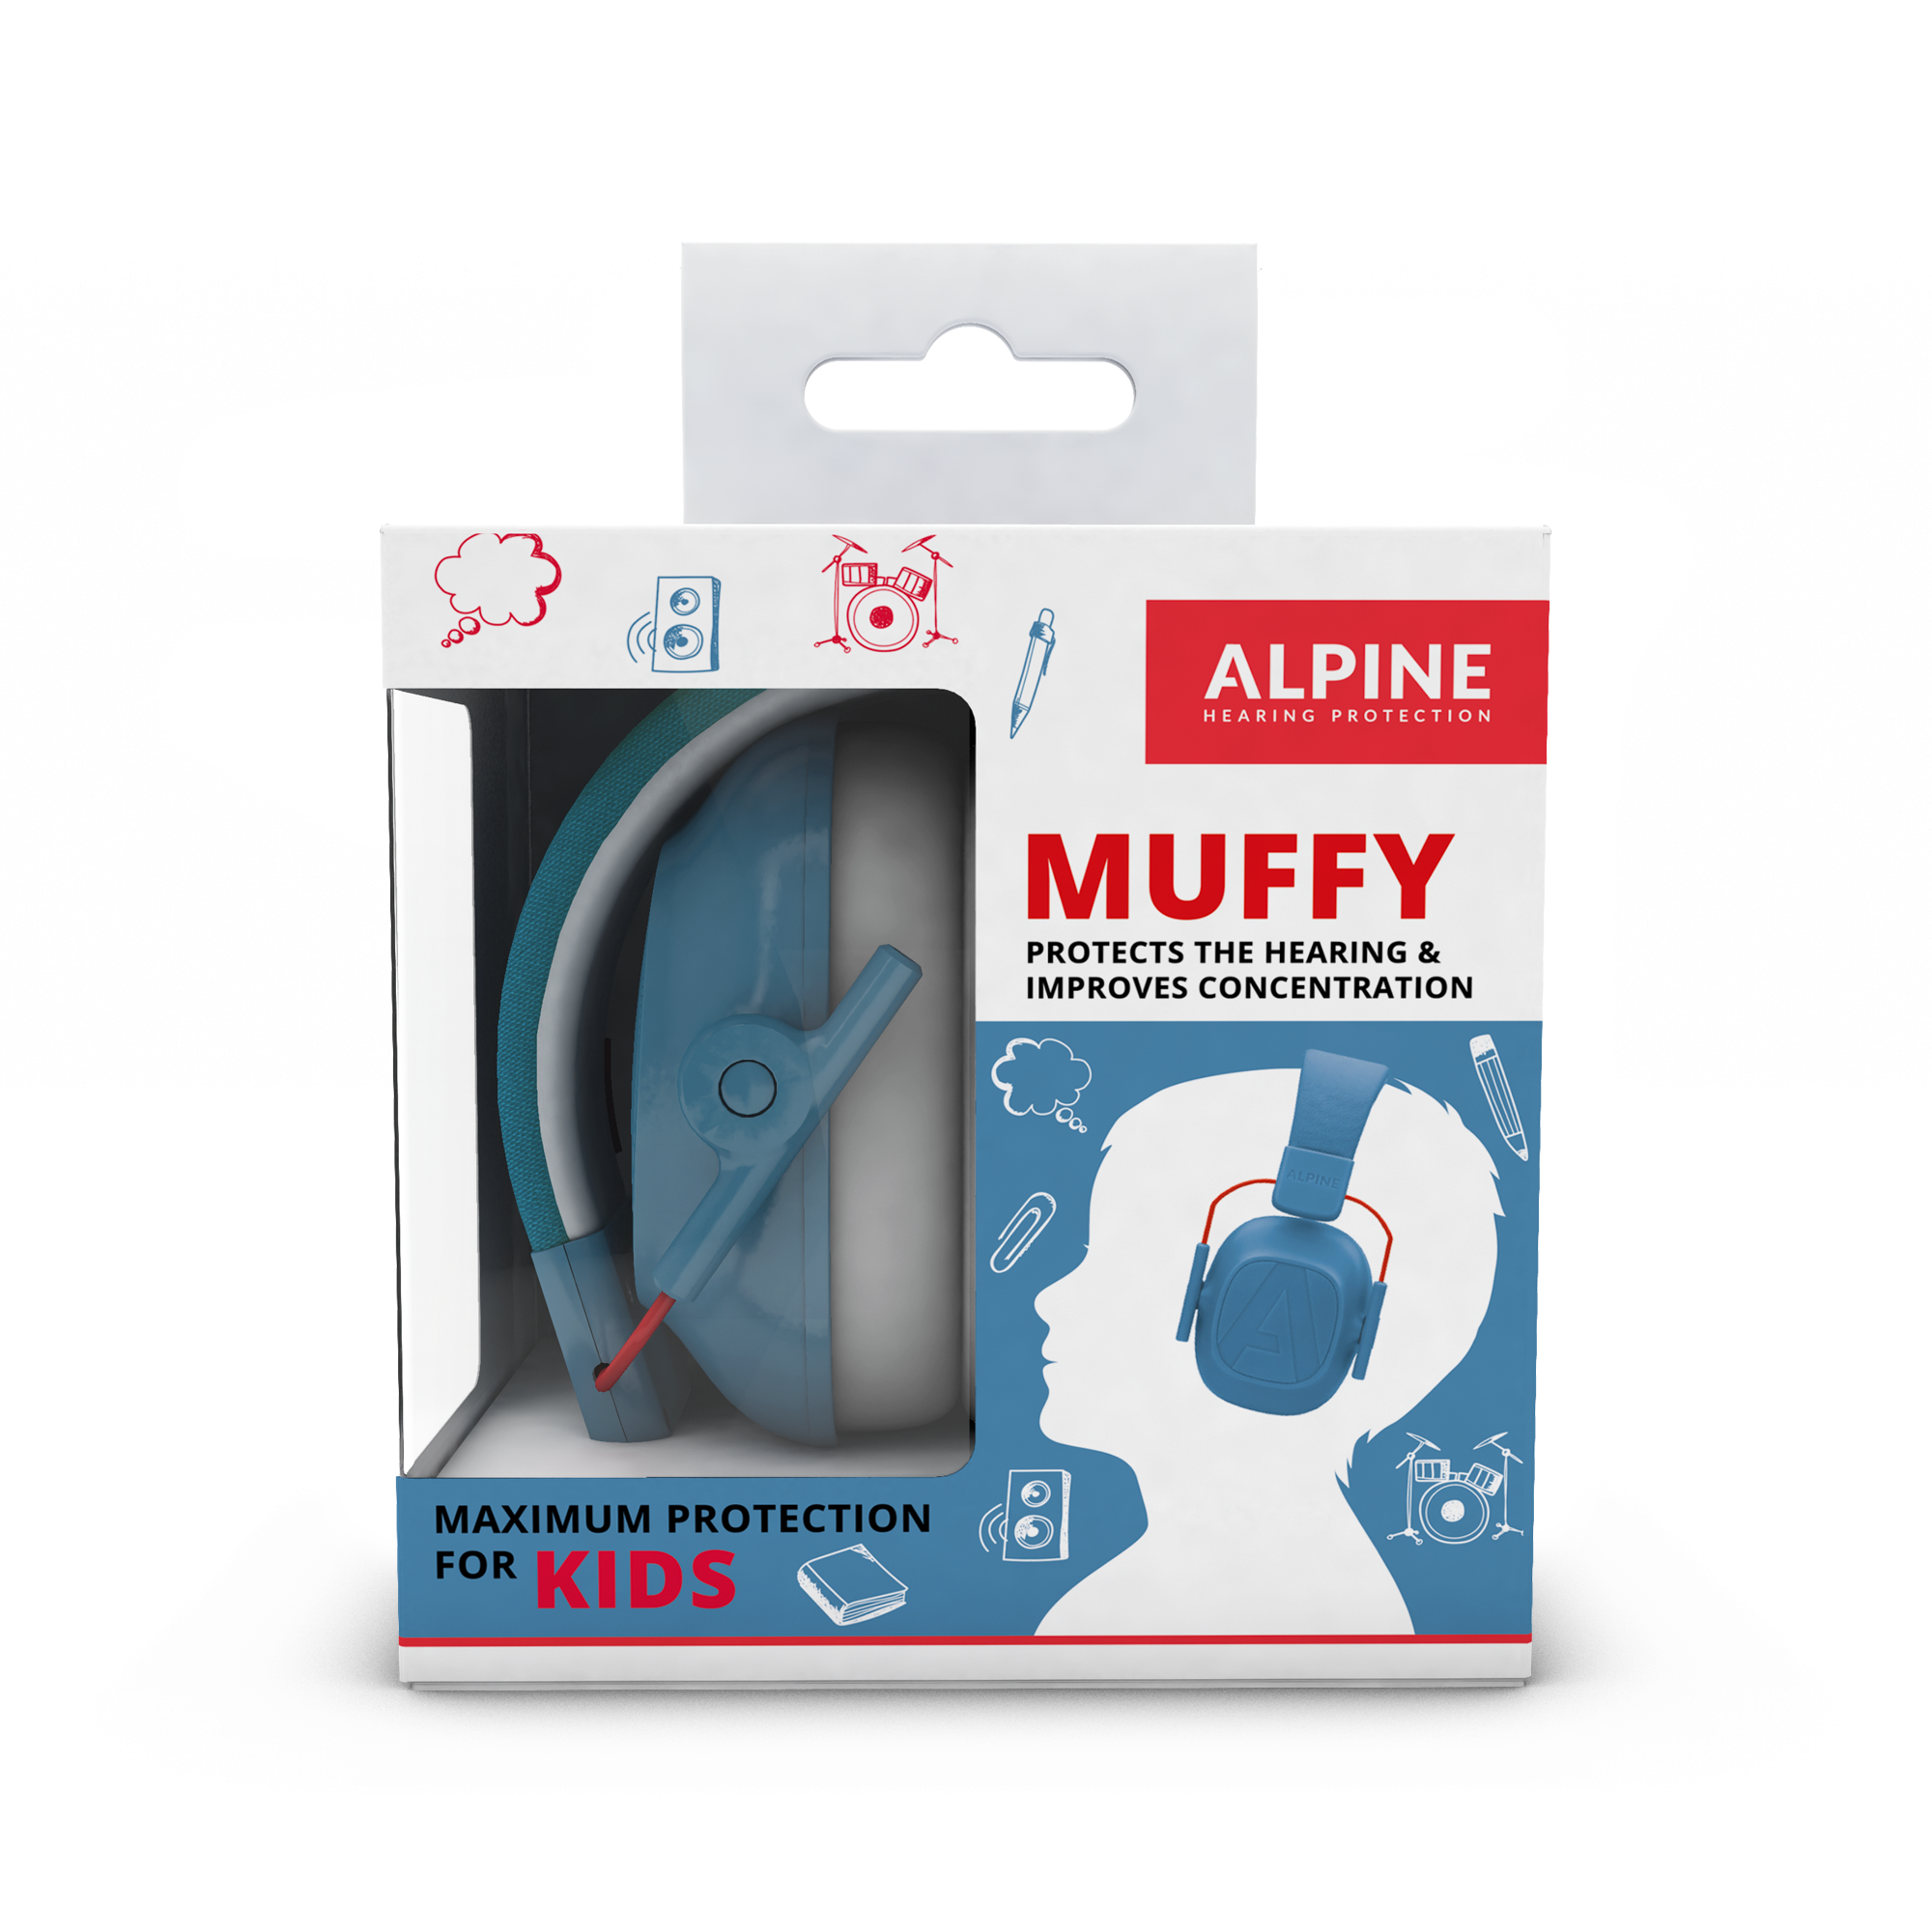 Alpine Muffy Kids hearing protection for kids – Alpine Hearing Protection